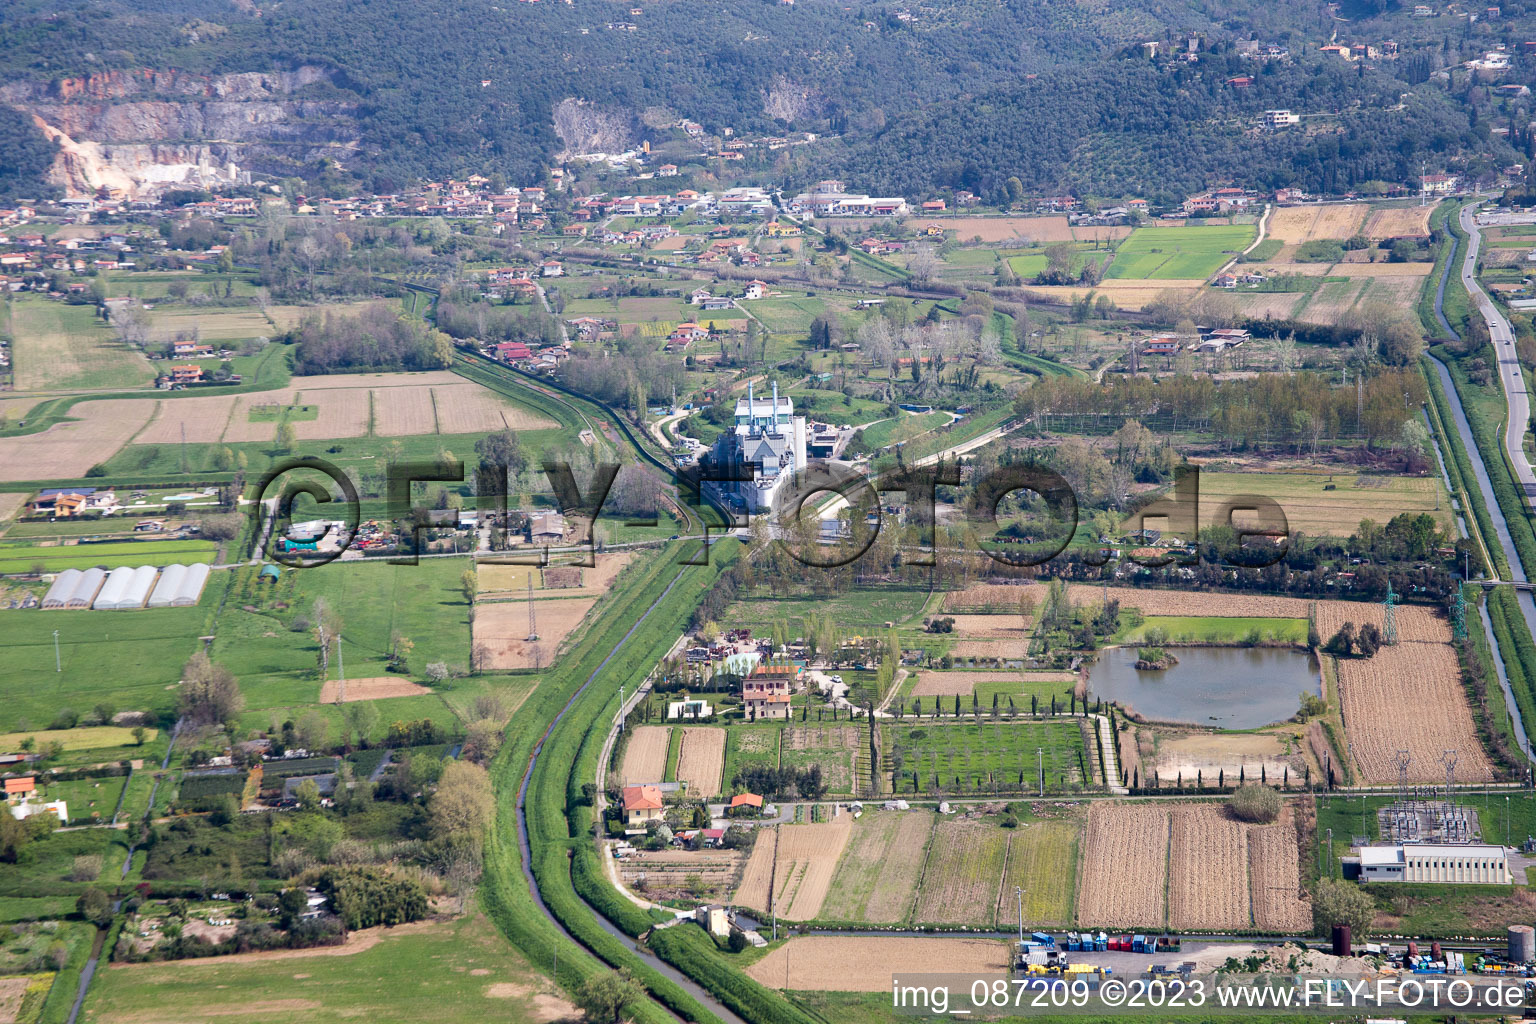 Aerial view of Pietrasanta in the state Tuscany, Italy